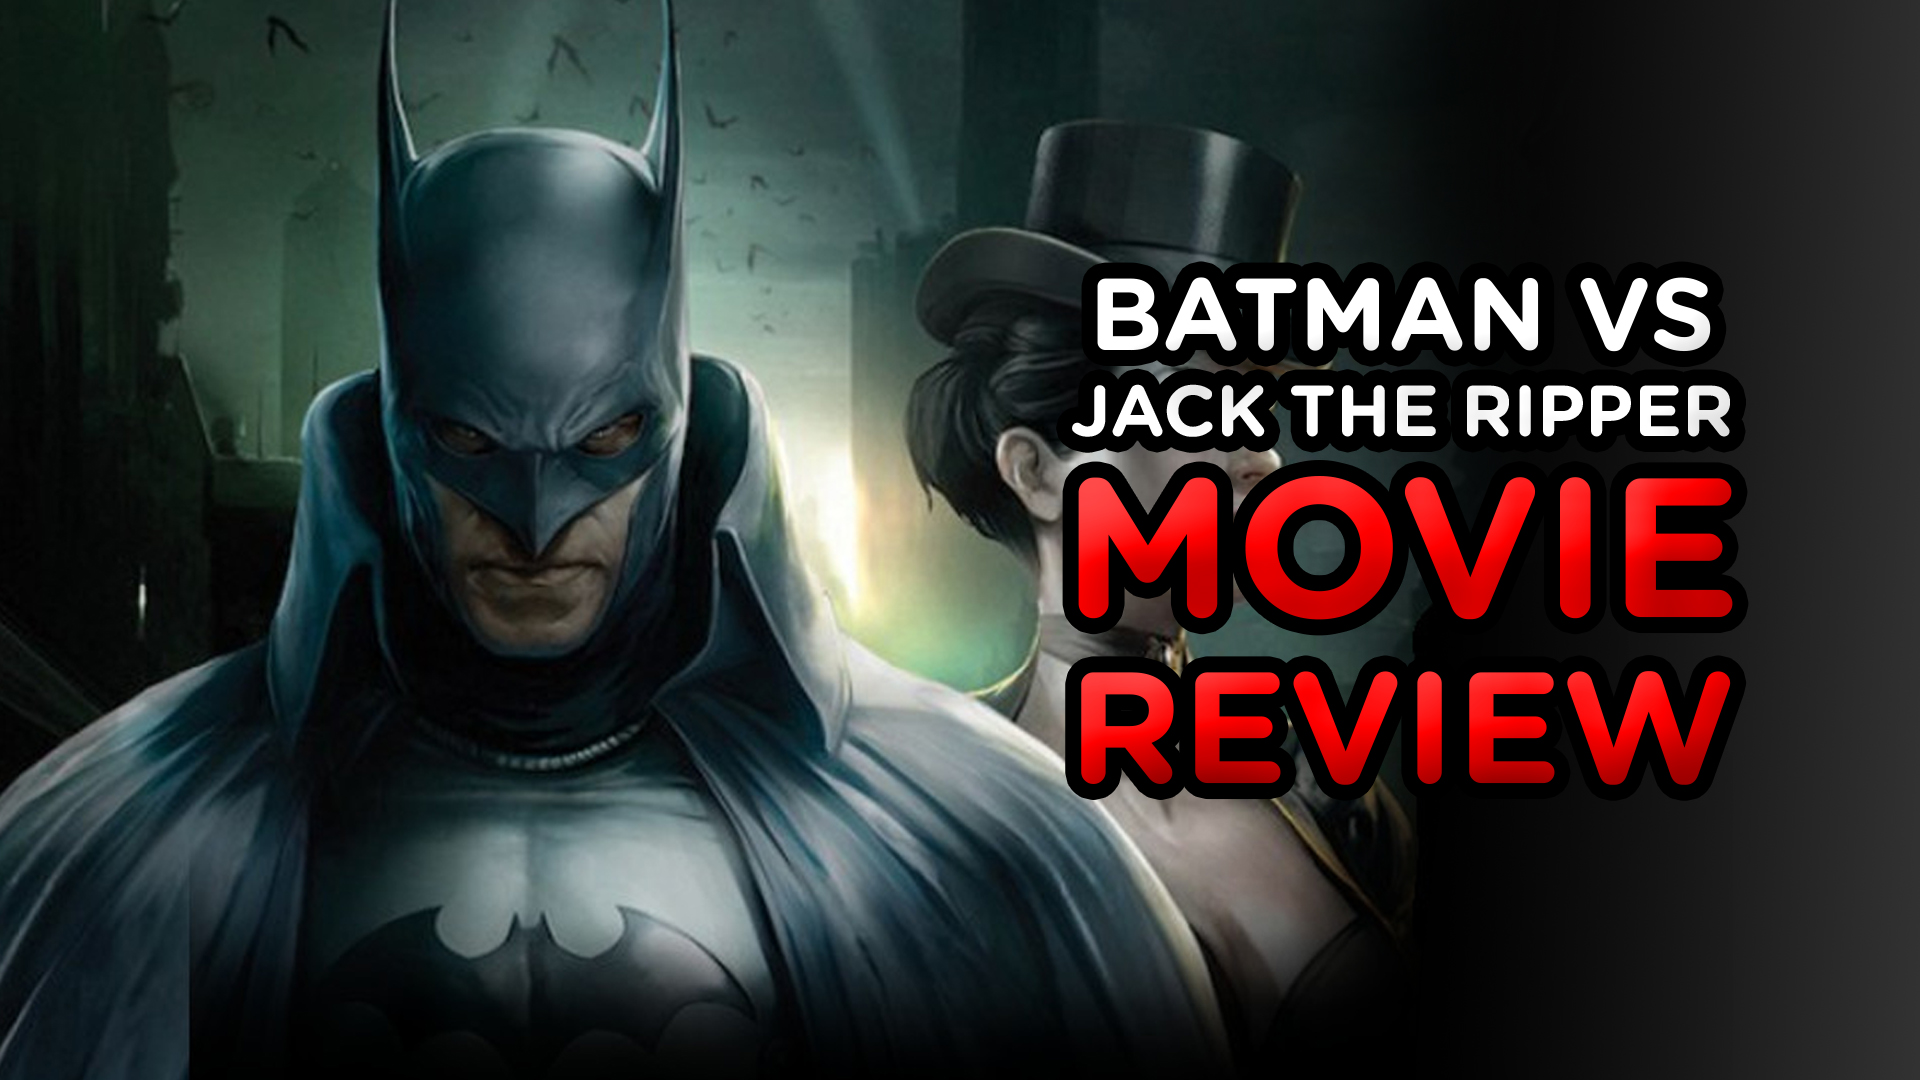 Batman Gotham By Gaslight Animated Movie Review By Deffinition Discussing DCs Latest Feature Length Movie